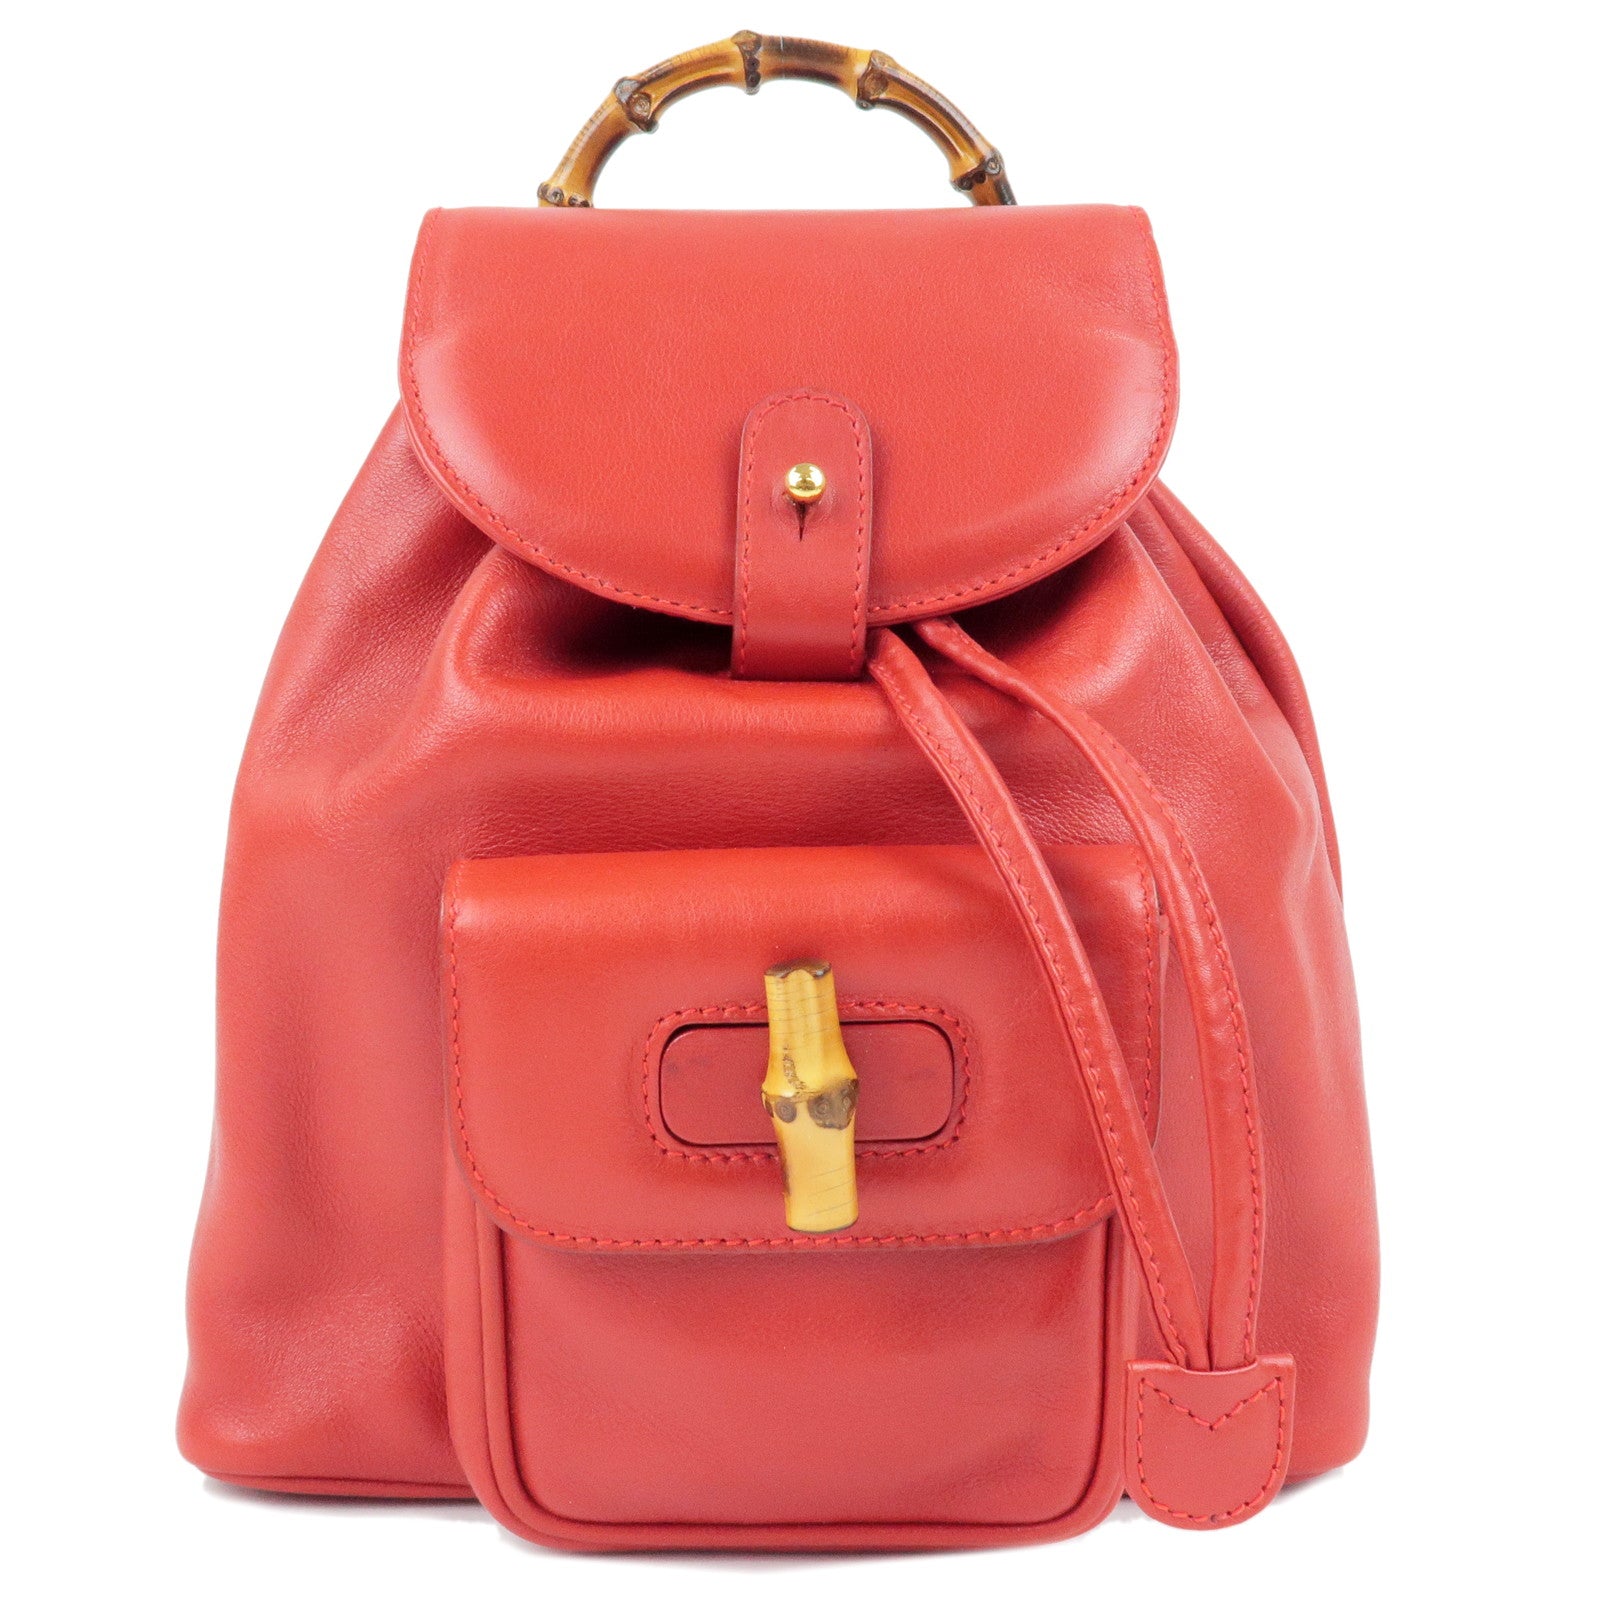 GUCCI-Bamboo-Leather-Back-Pack-Ruck-Sack-Red-003.3444.0030